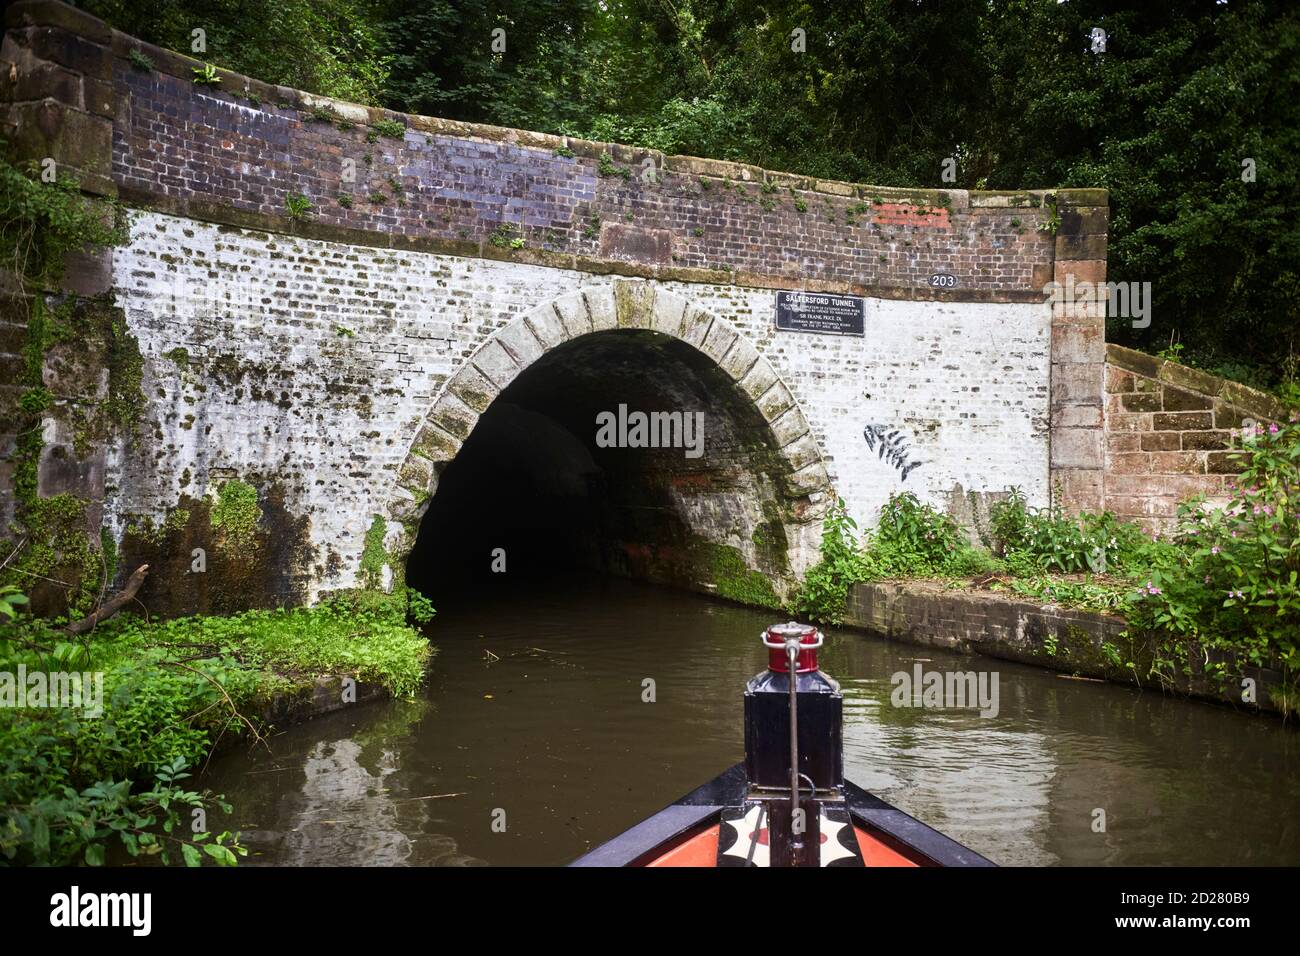 Entrance to the south end of the Saltersford Tunnel on the Trent and Mersey canal at Anderton Stock Photo